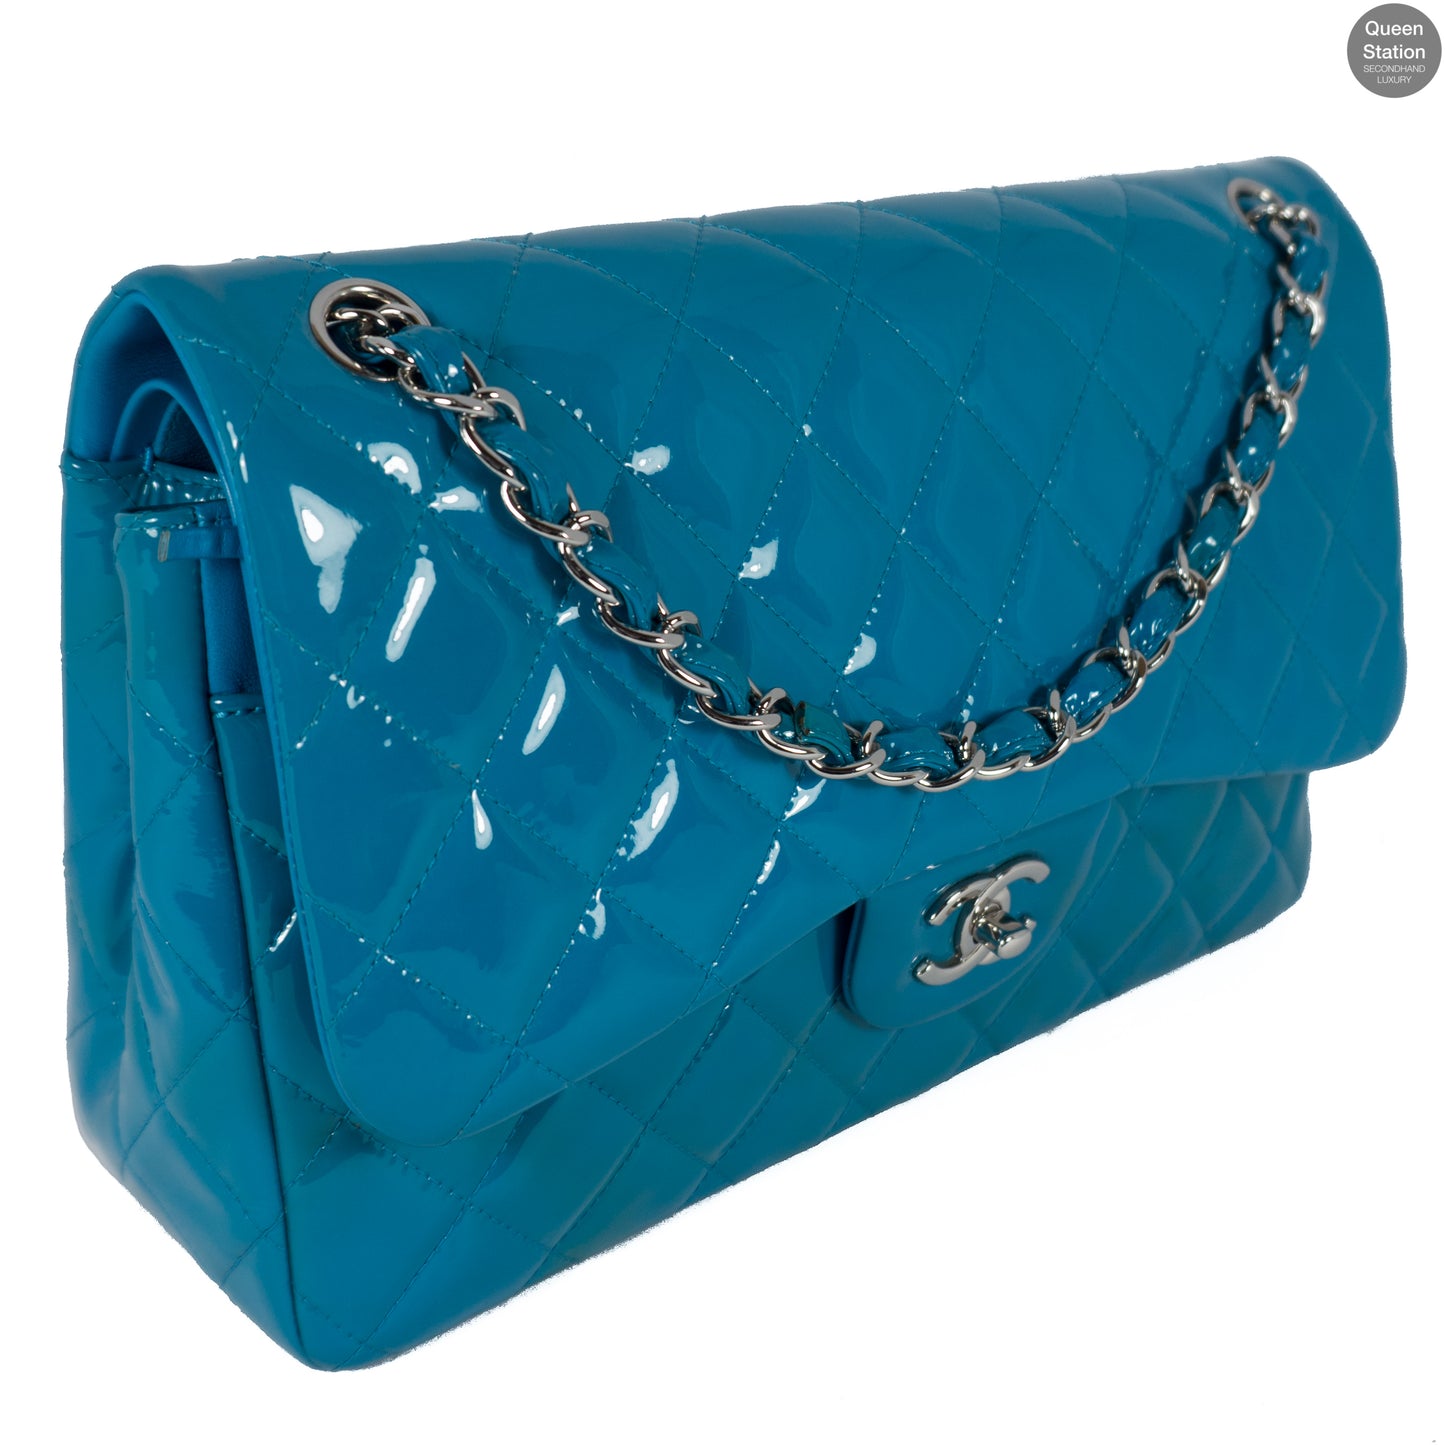 Classic Double Flap Jumbo Turquoise Patent Leather